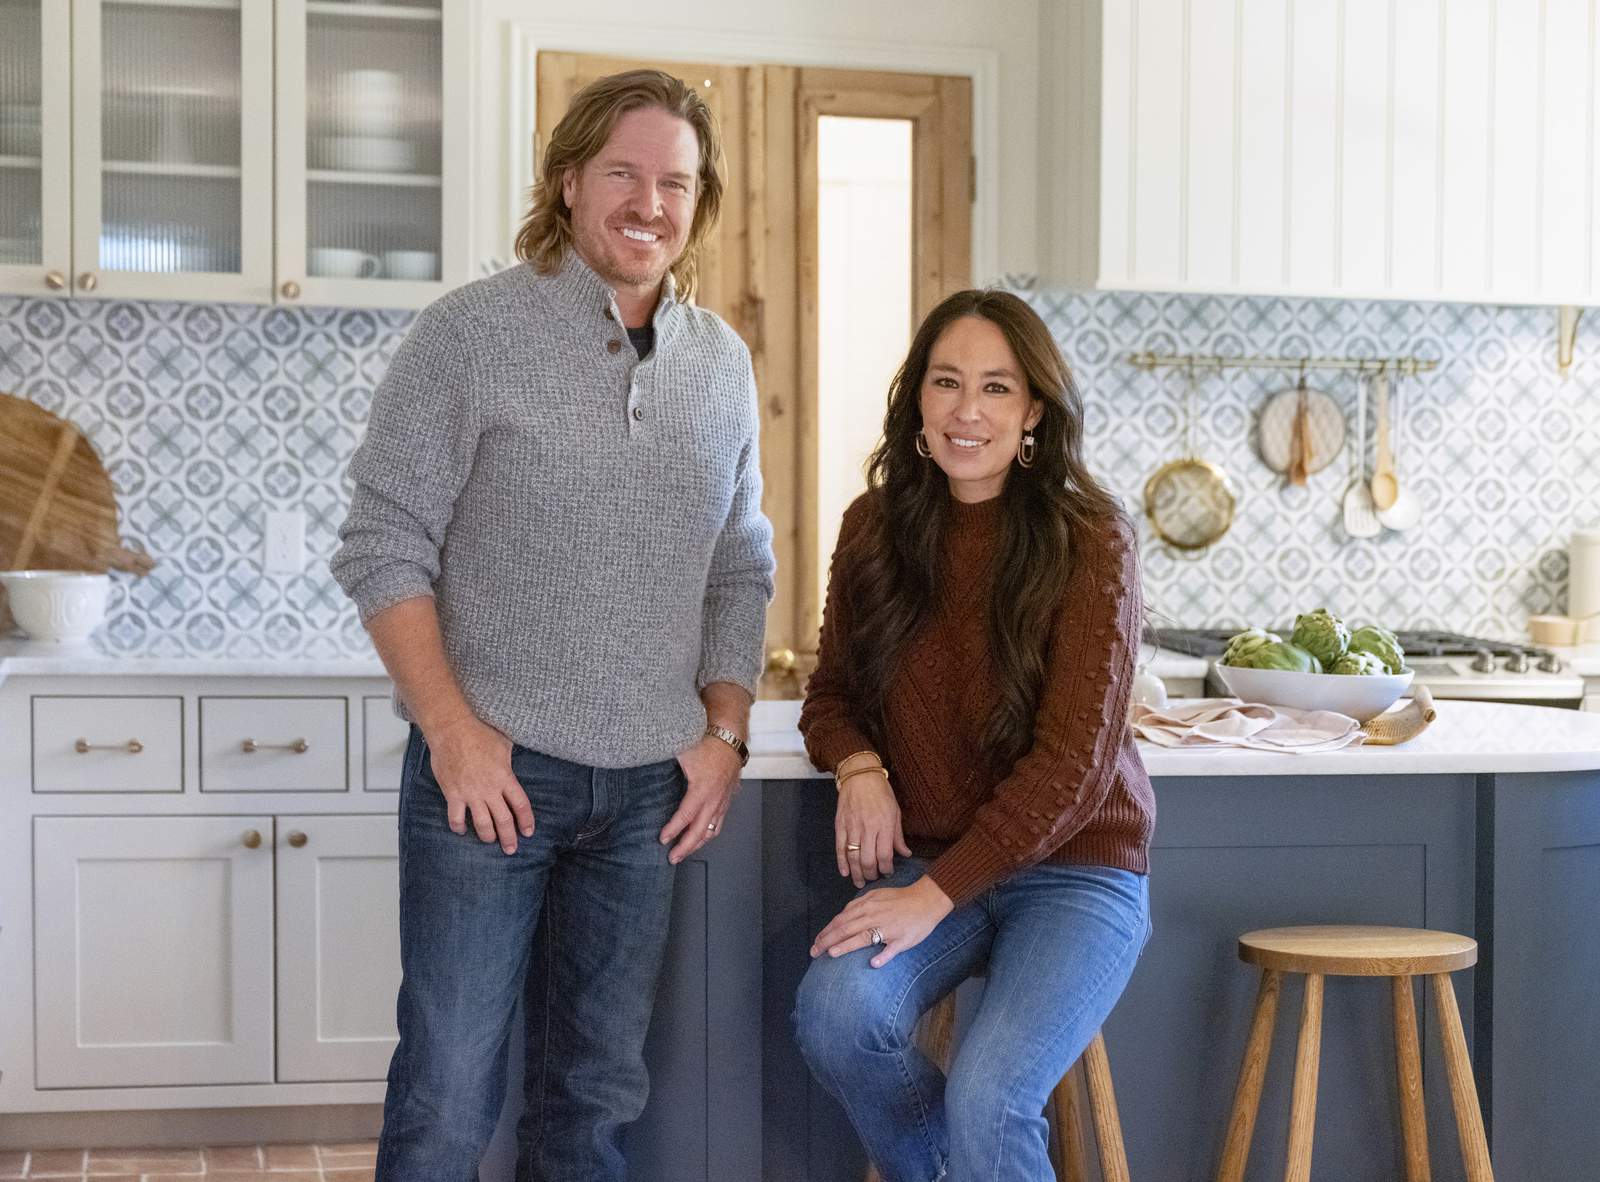 Chip and Joanna Gaines’ Magnolia Network debuts January 2022